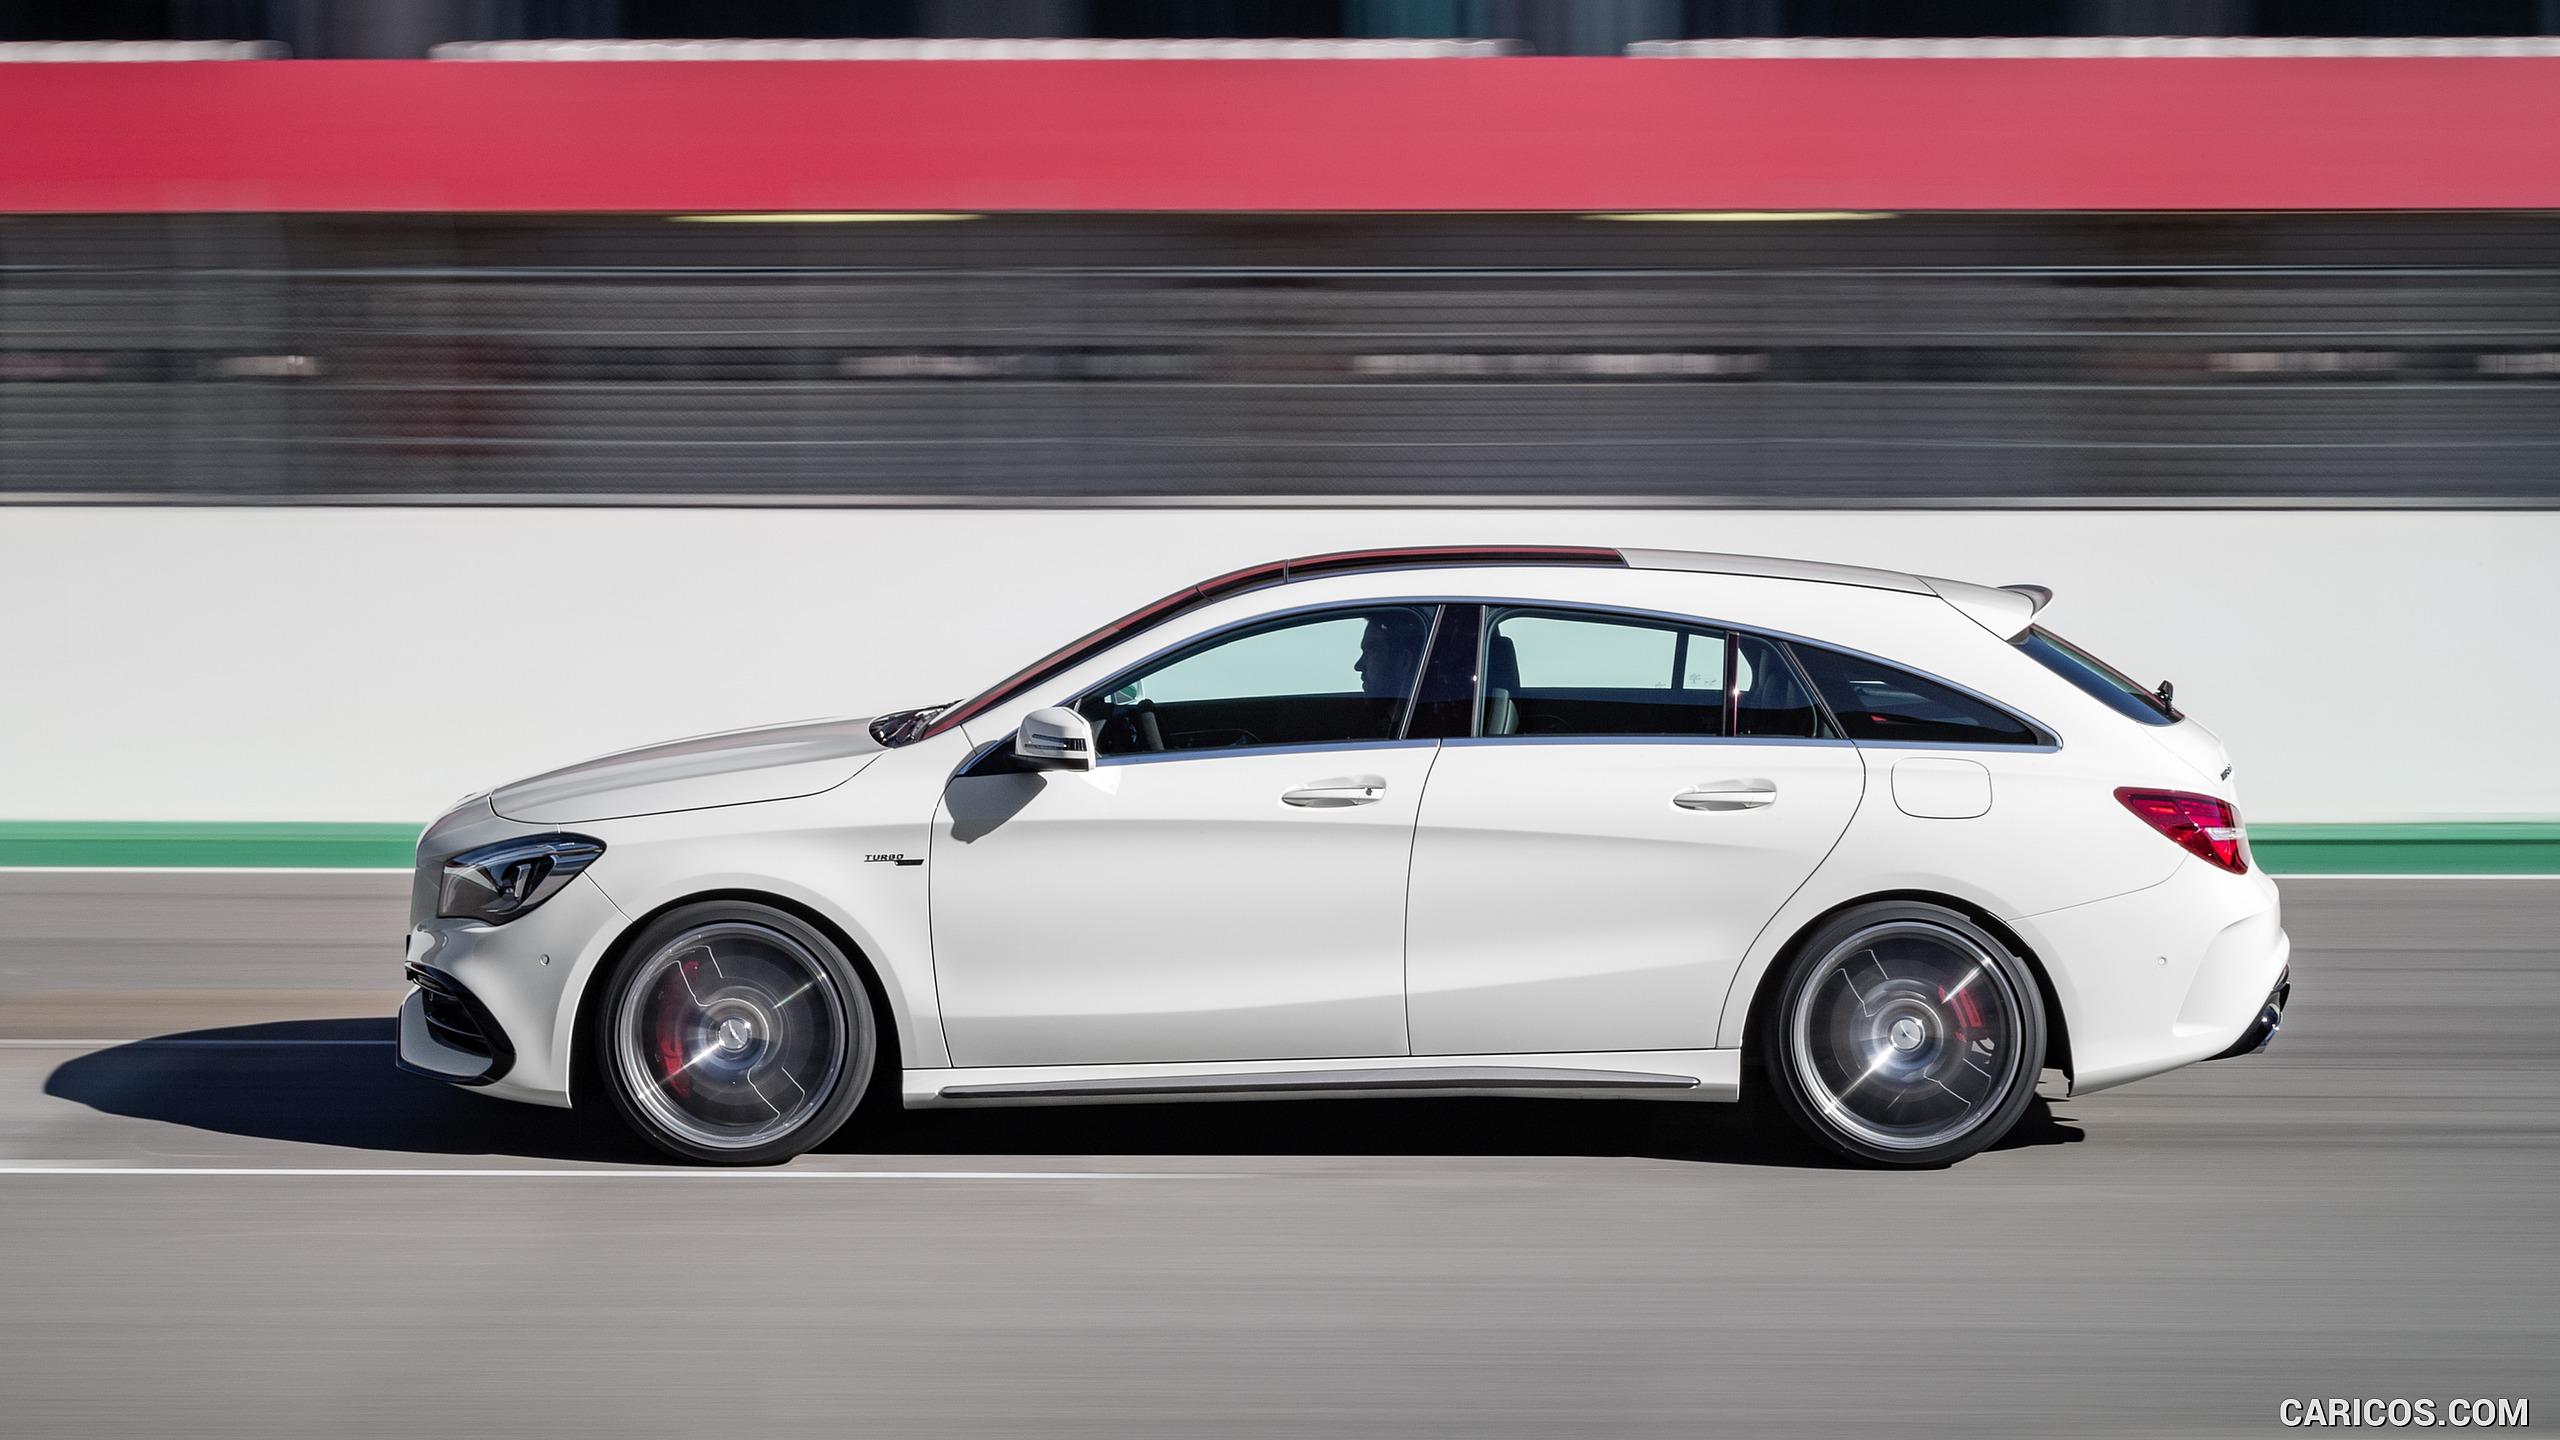 2017 Mercedes-AMG CLA 45 Shooting Brake (Chassis: X117, Color: Diamond White) - Side, #5 of 48